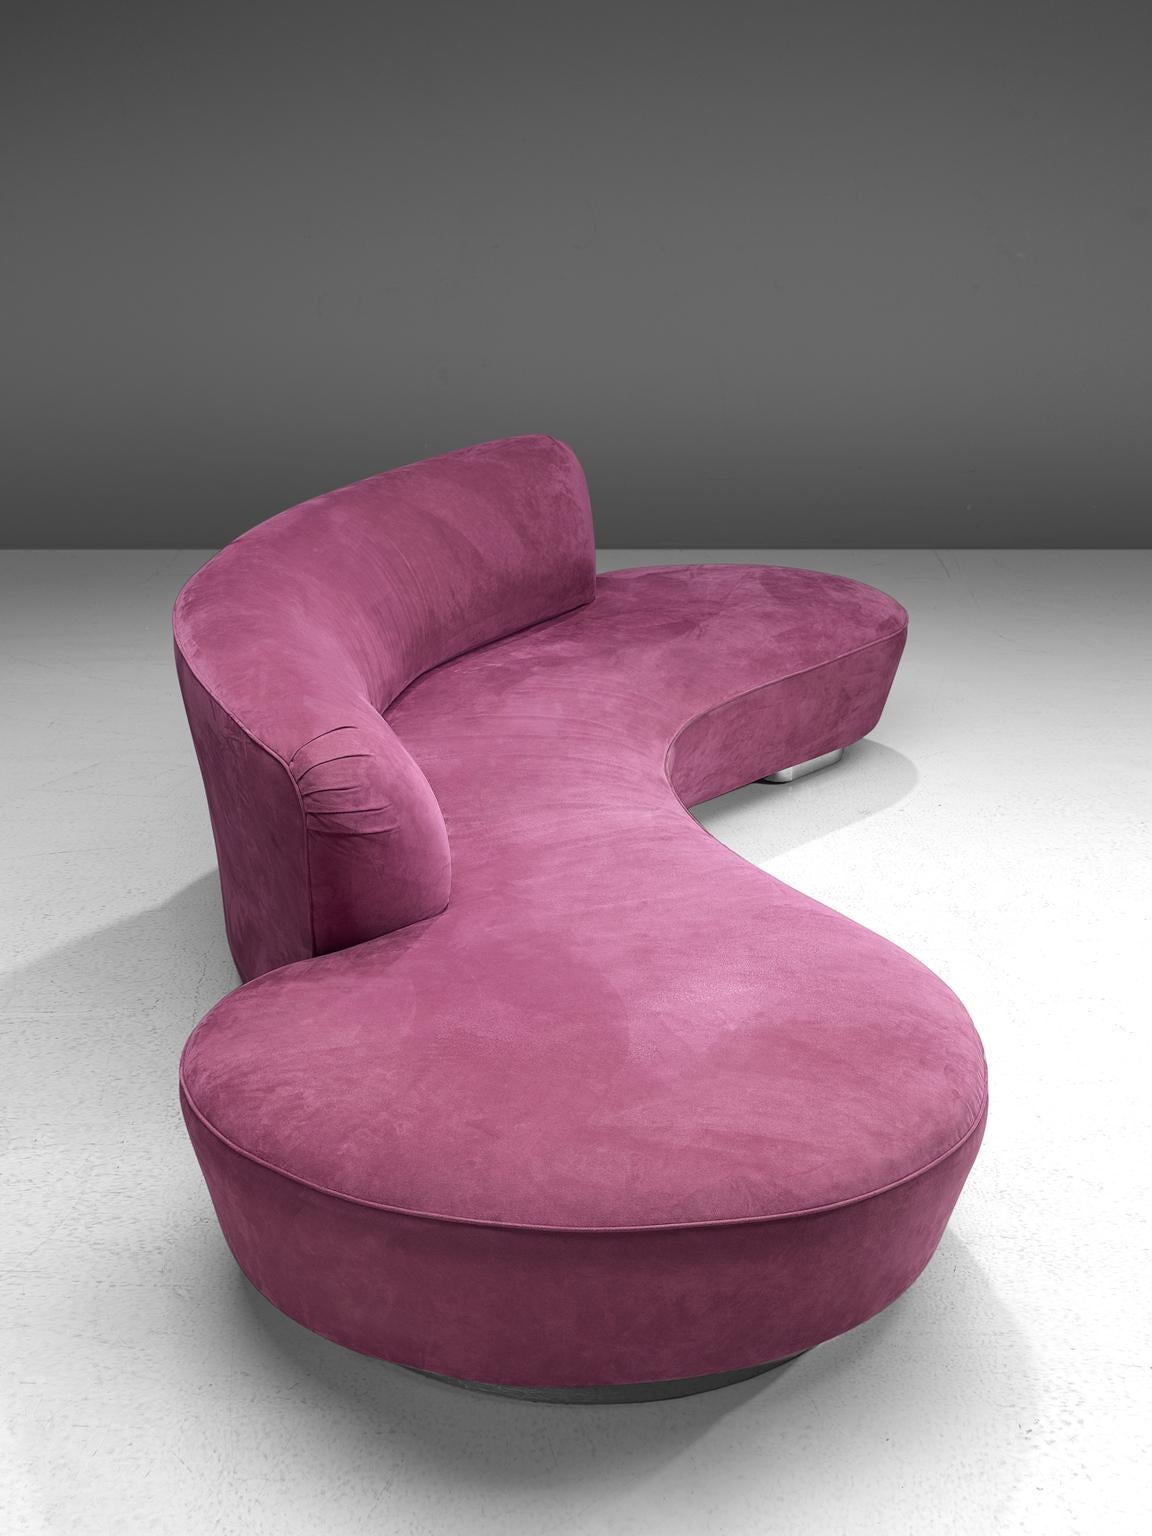 Vladimir Kagan, 'Serpentine' sofa, magenta fabric and chrome, United States, design 1950, later production.

This Serpentine sofa by Vladimir Kagan has a sculptural beauty thanks to its clarity and biomorphic shape. In Kagan's own words 'one form